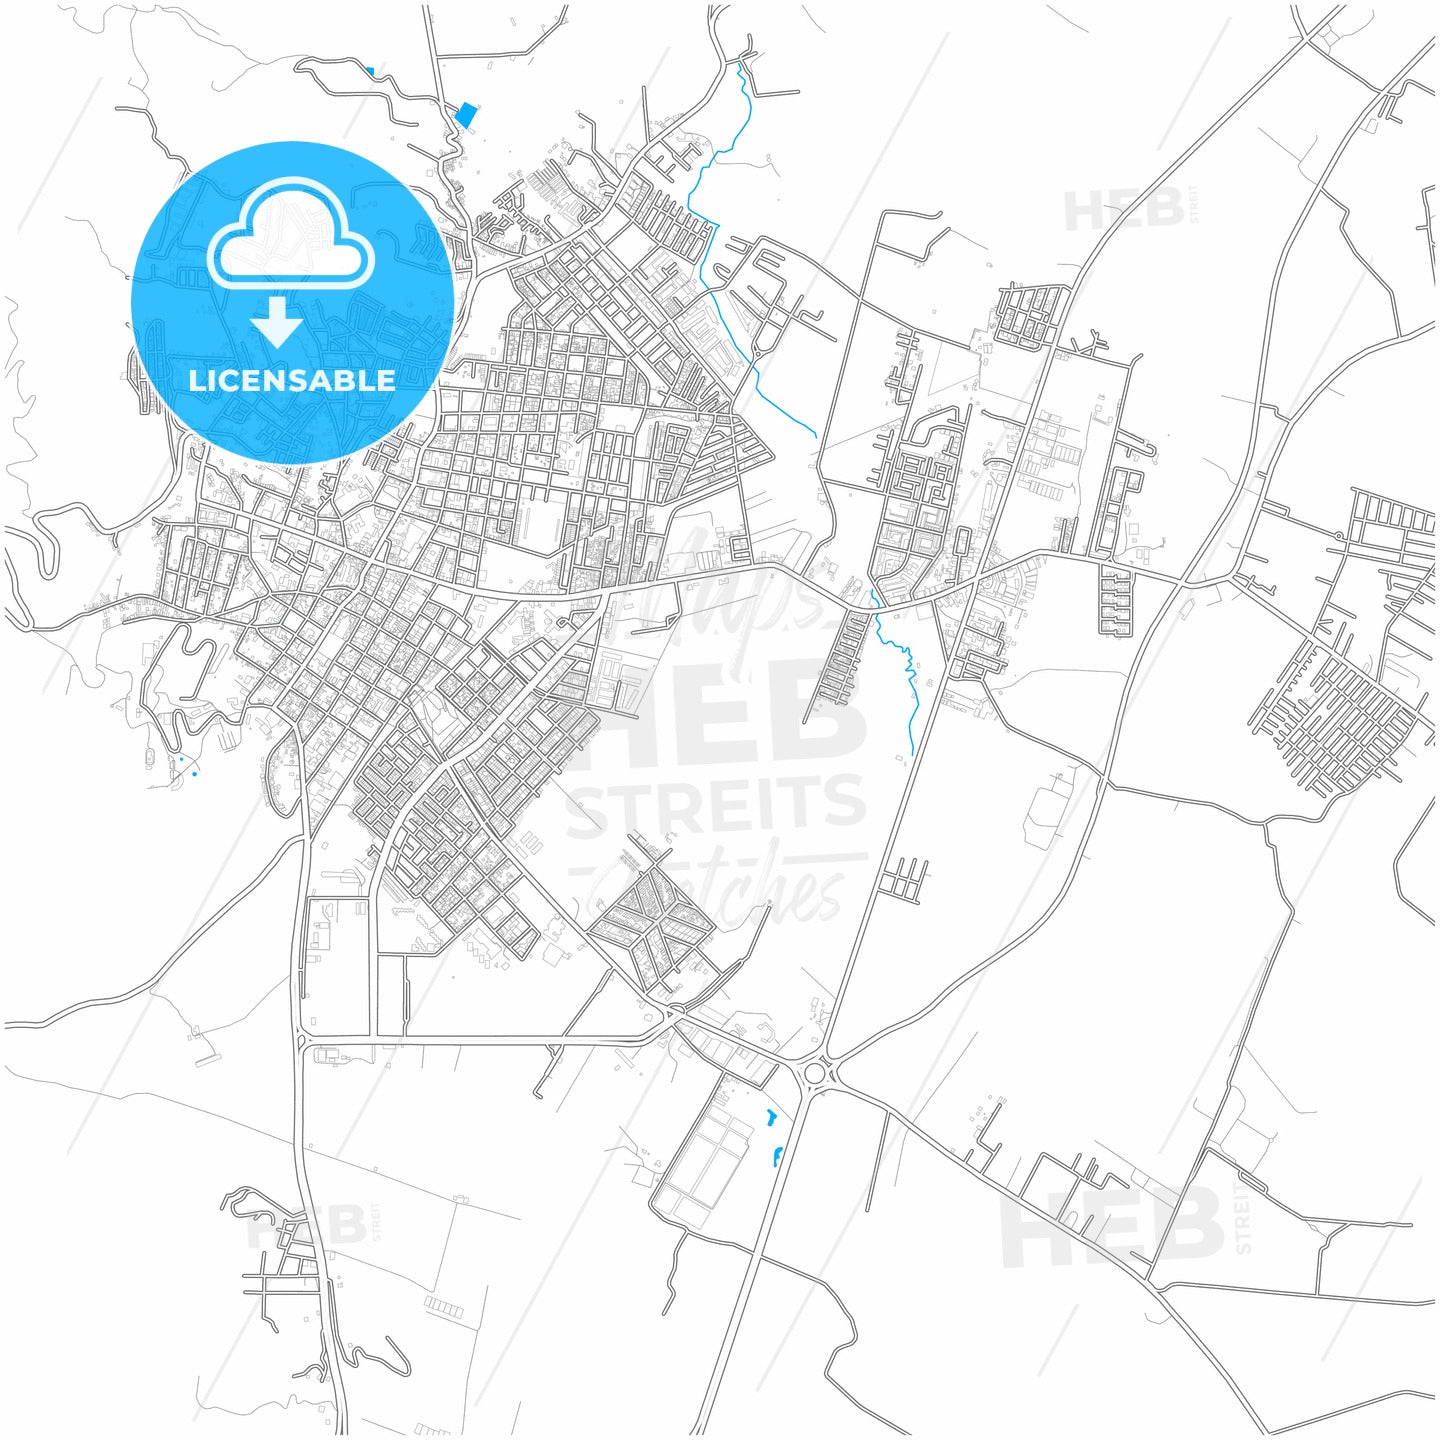 Zipaquira, Colombia, city map with high quality roads.